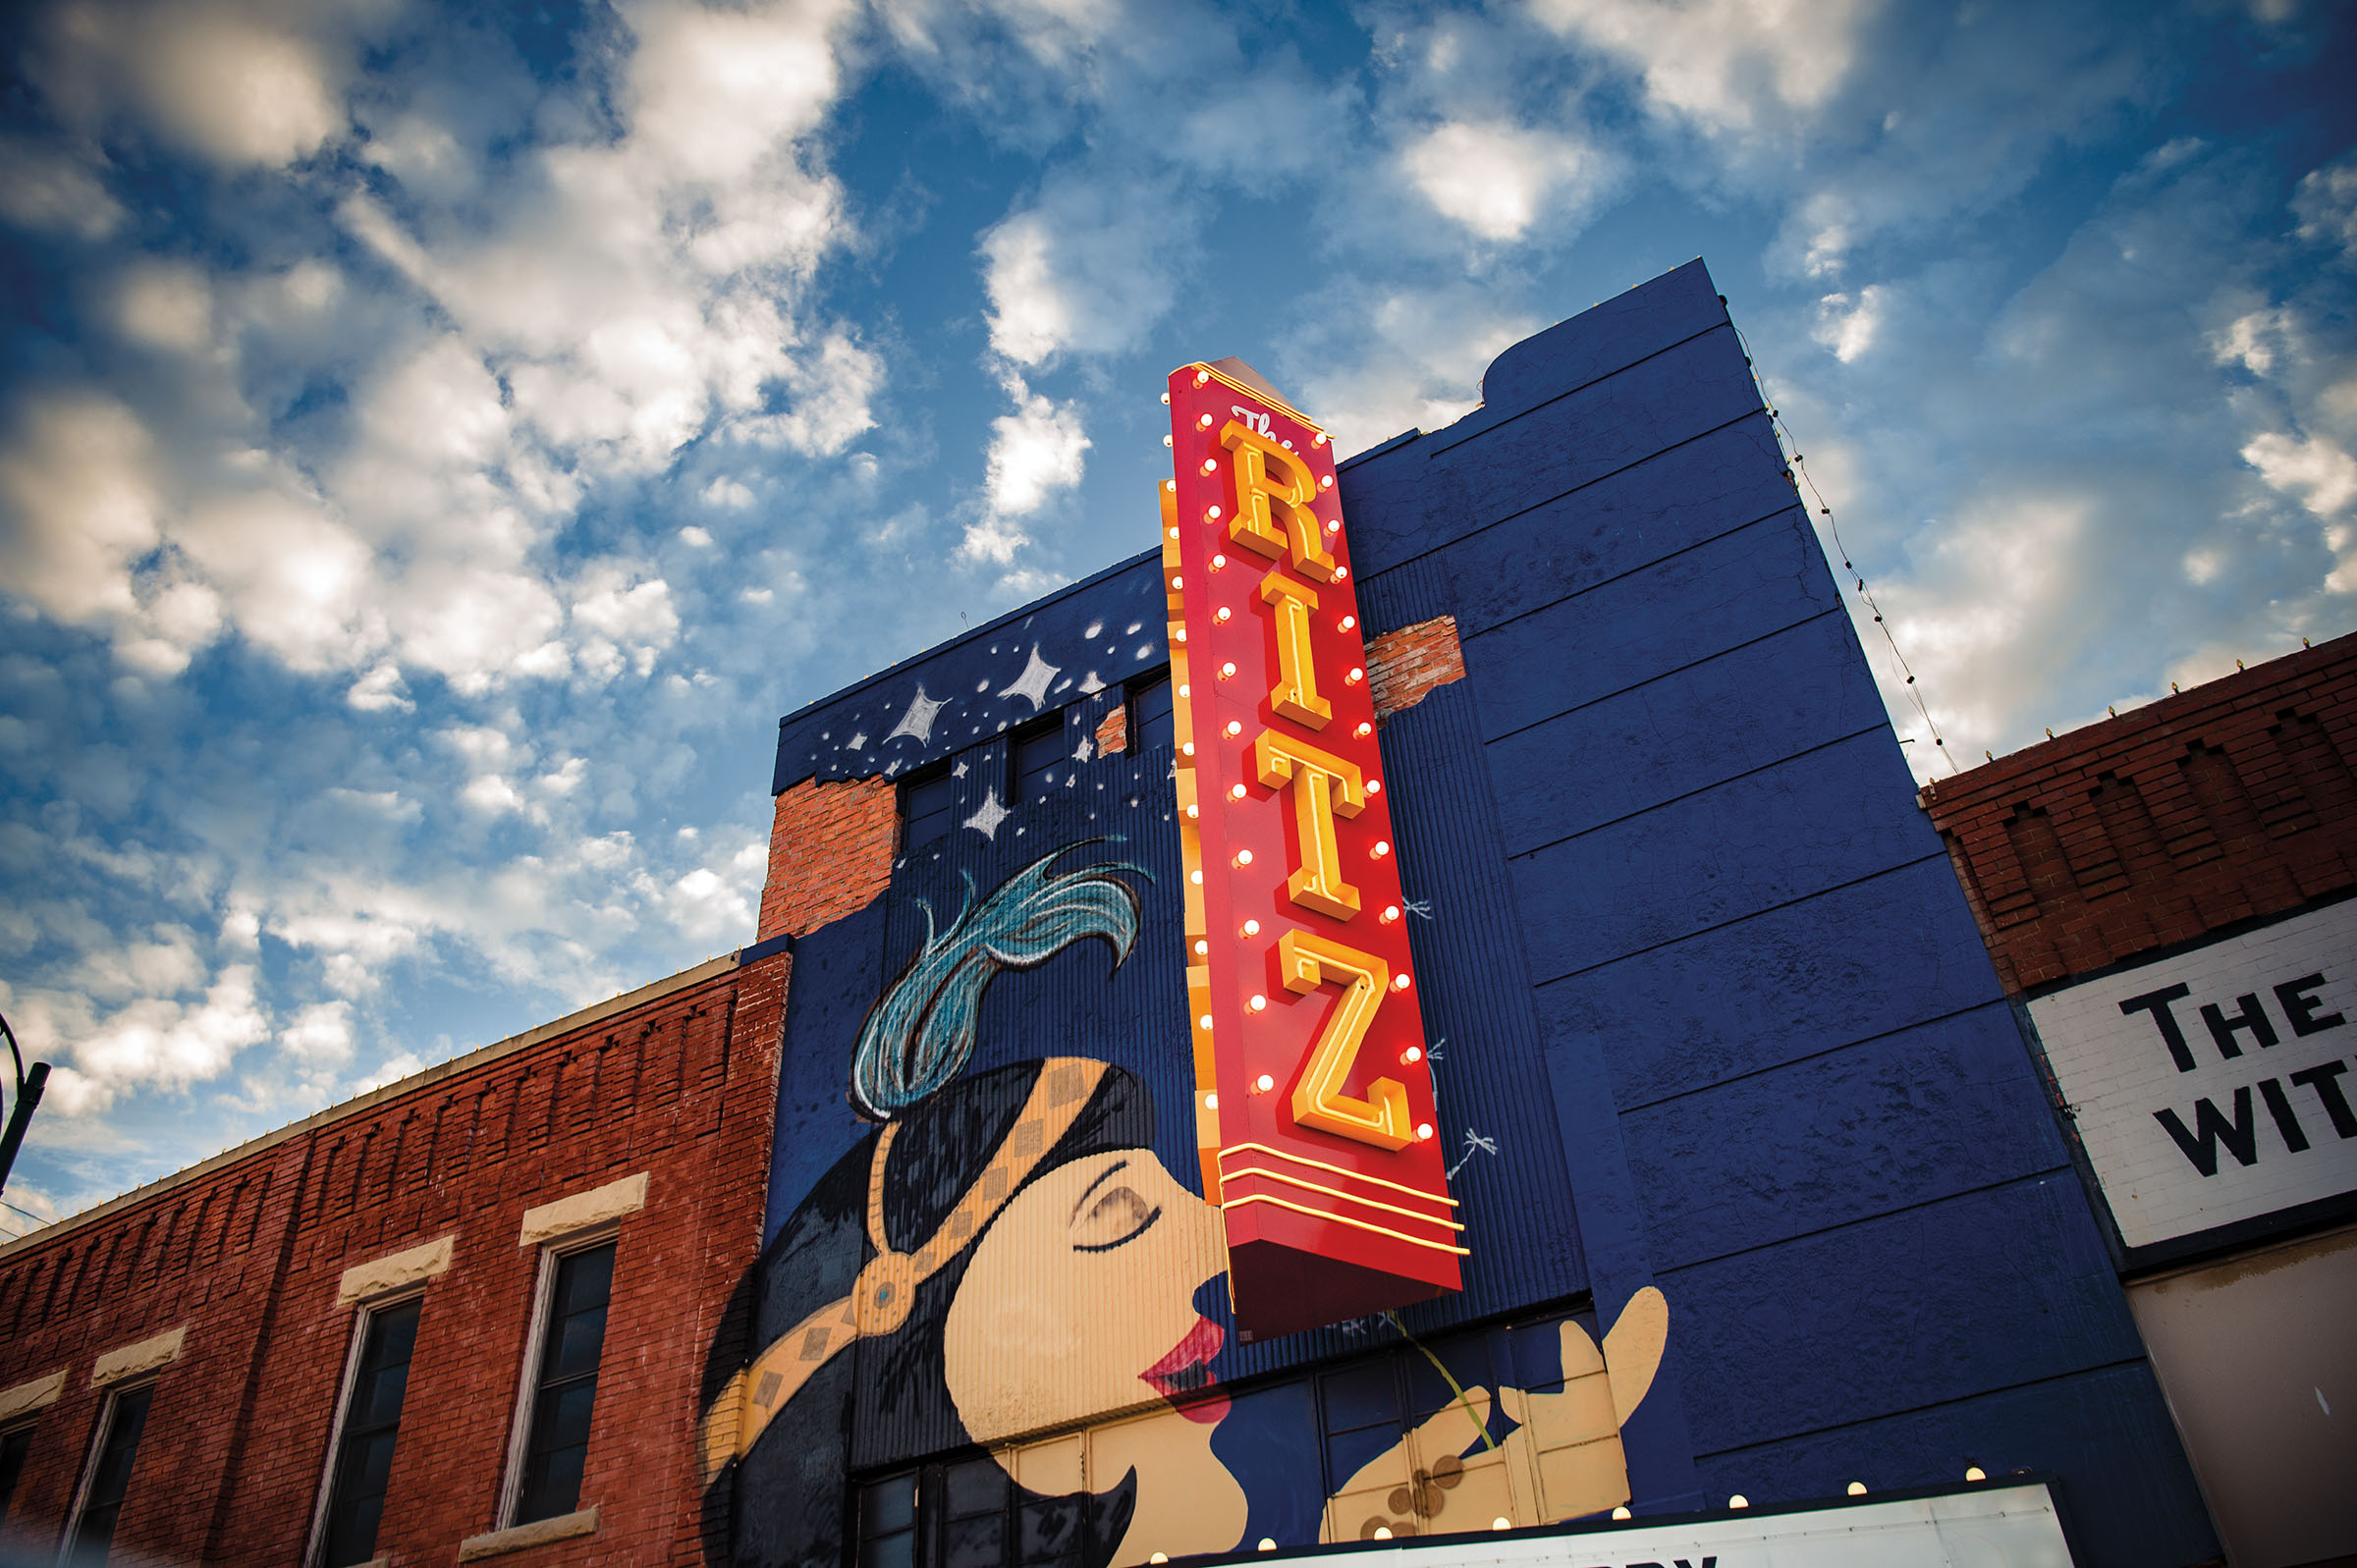 The exterior of a red and blue theater with a large sign reading "Ritz" under a blue sky with clouds